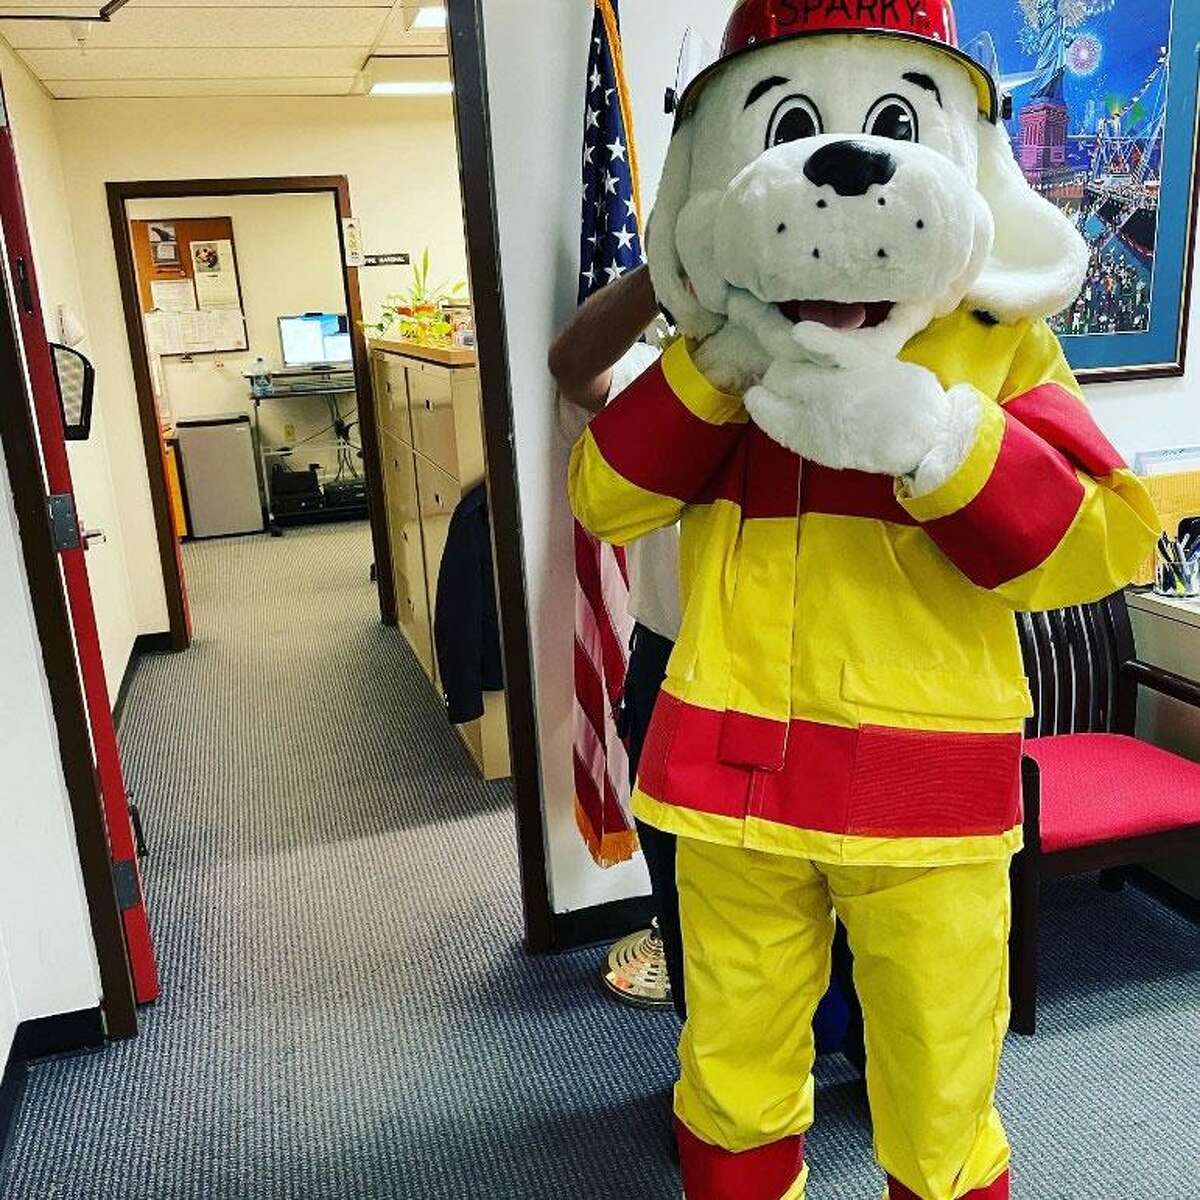 The National Fire Protection Association, NFPA's official mascot, Sparky the Fire Dog, is previously shown at one of the Wilton Fire Department's locations in the town. Wilton Fire Chief Jim Blanchfield writes this guest column about fire safety, “Fire Prevention Week,” which is the second week of the month of October, and “Fire Prevention Month,” which is the month of October.